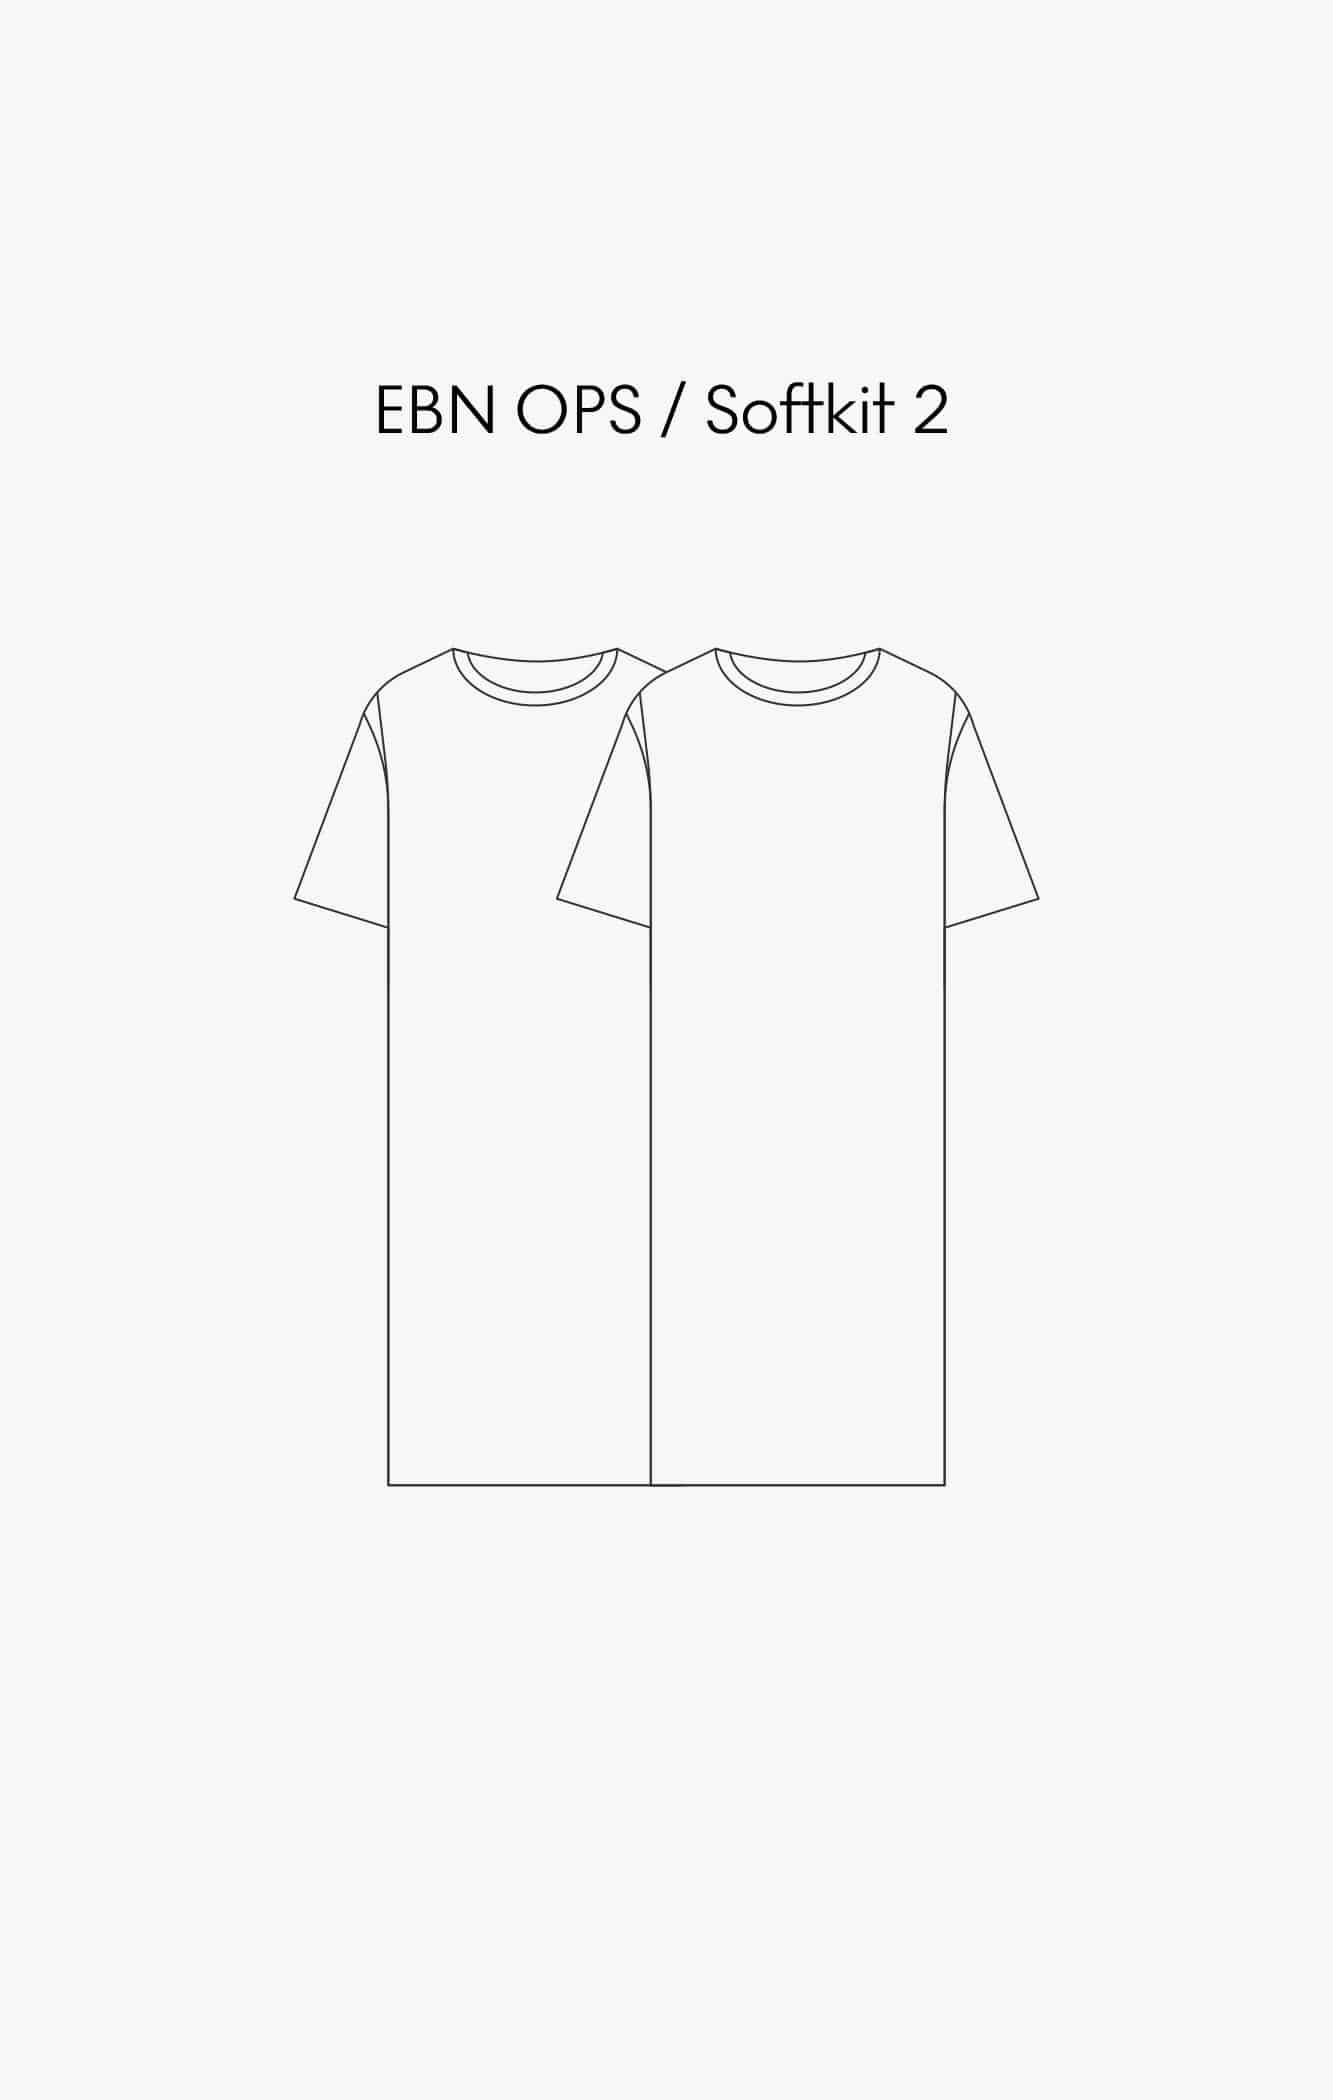 EBN OPS SoftKit 2